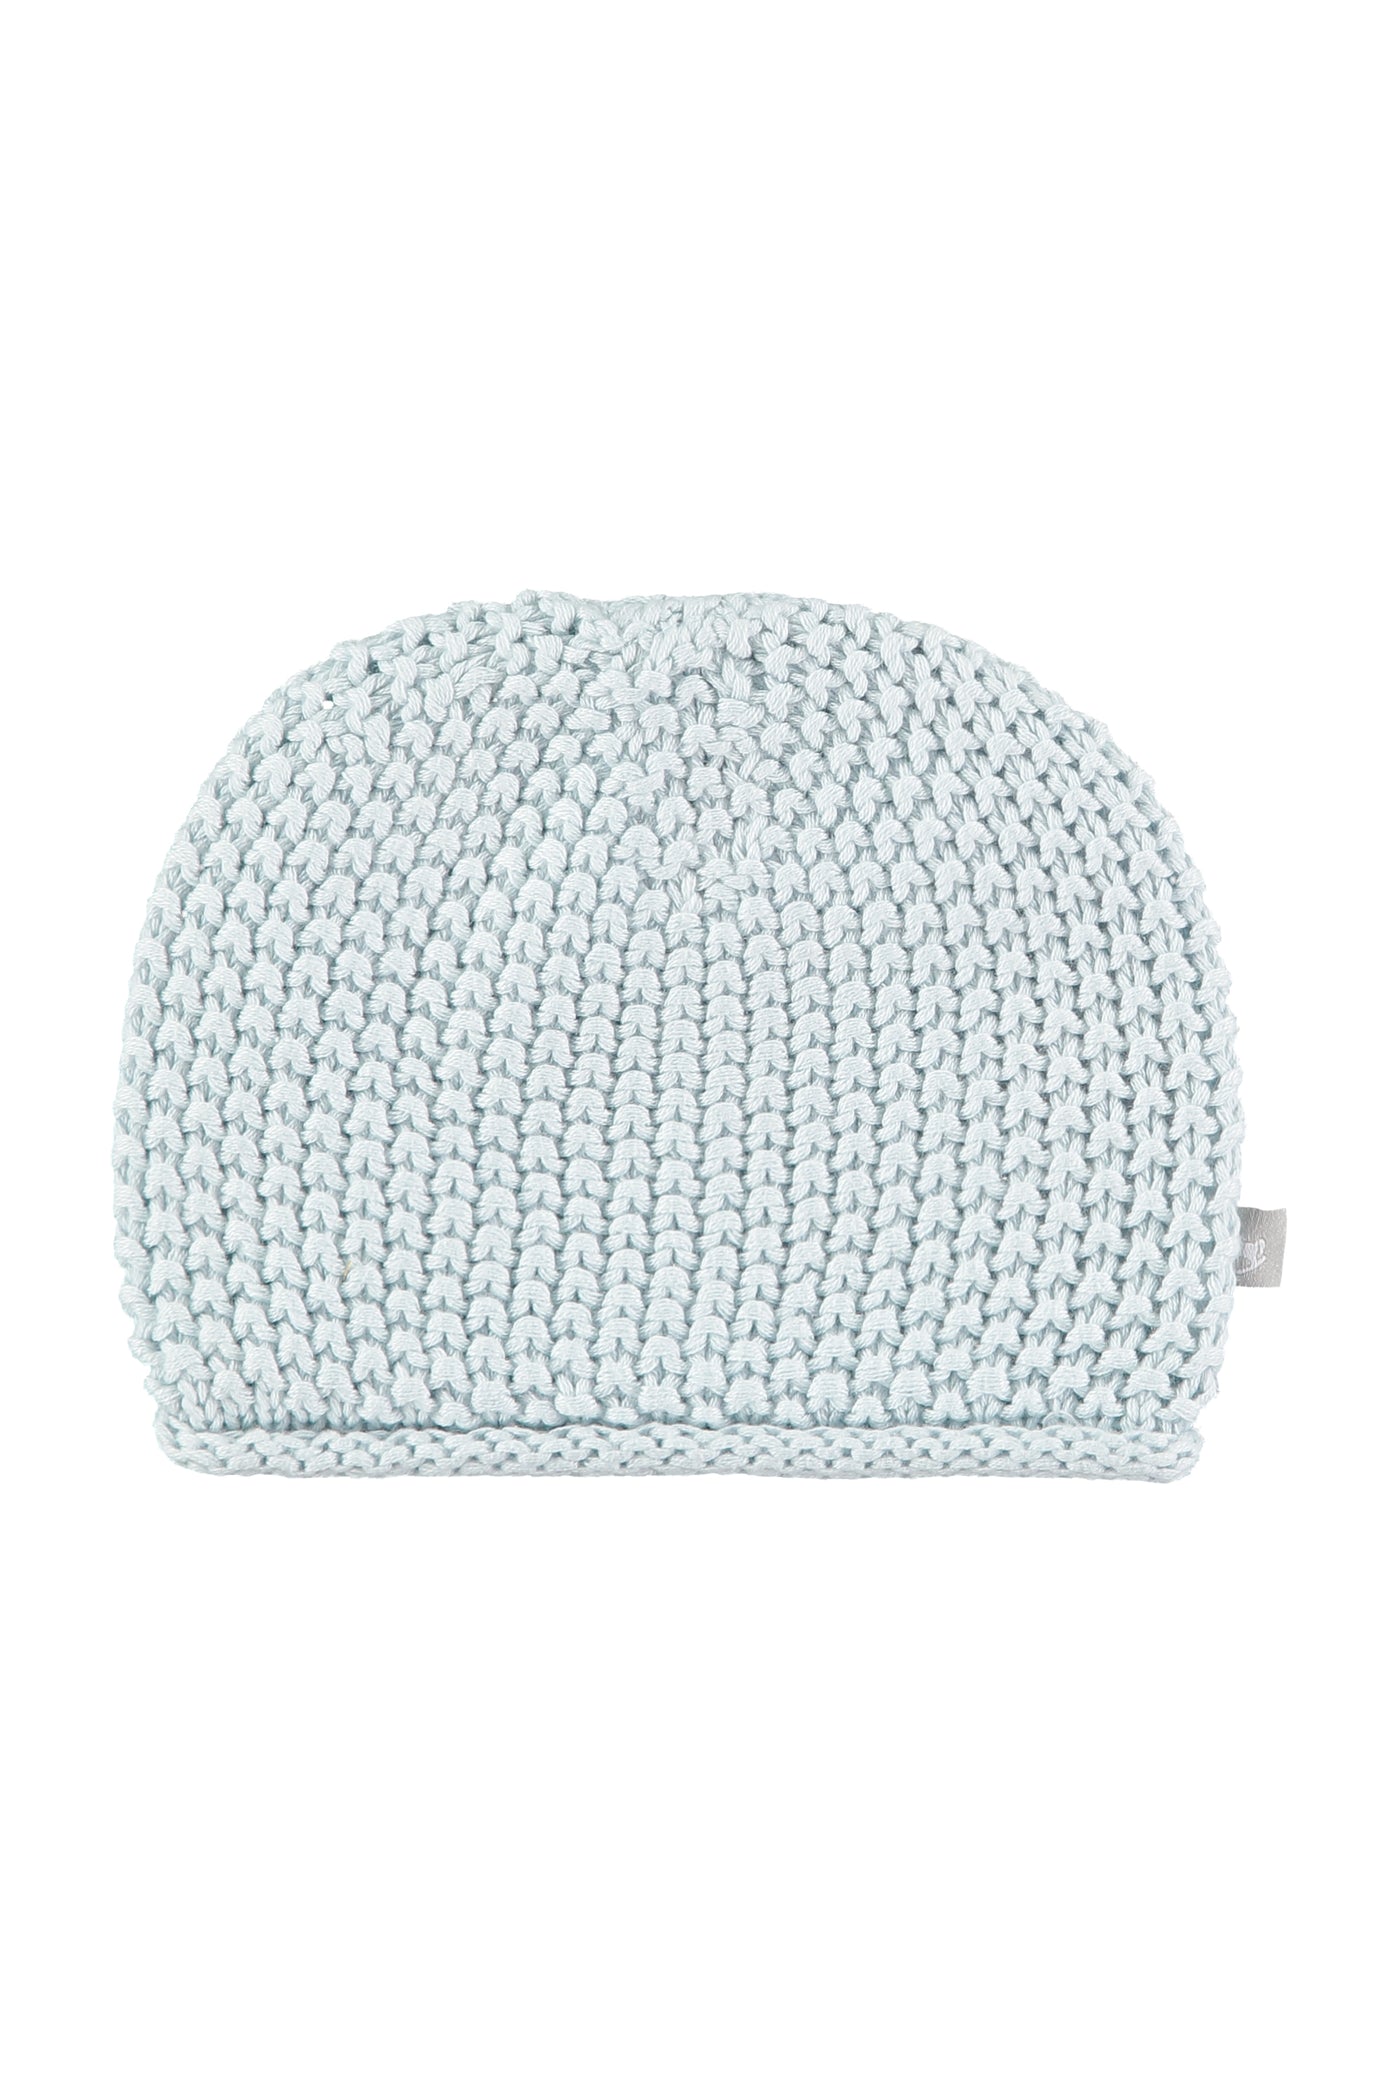 Cotton Knitted Hat, blue